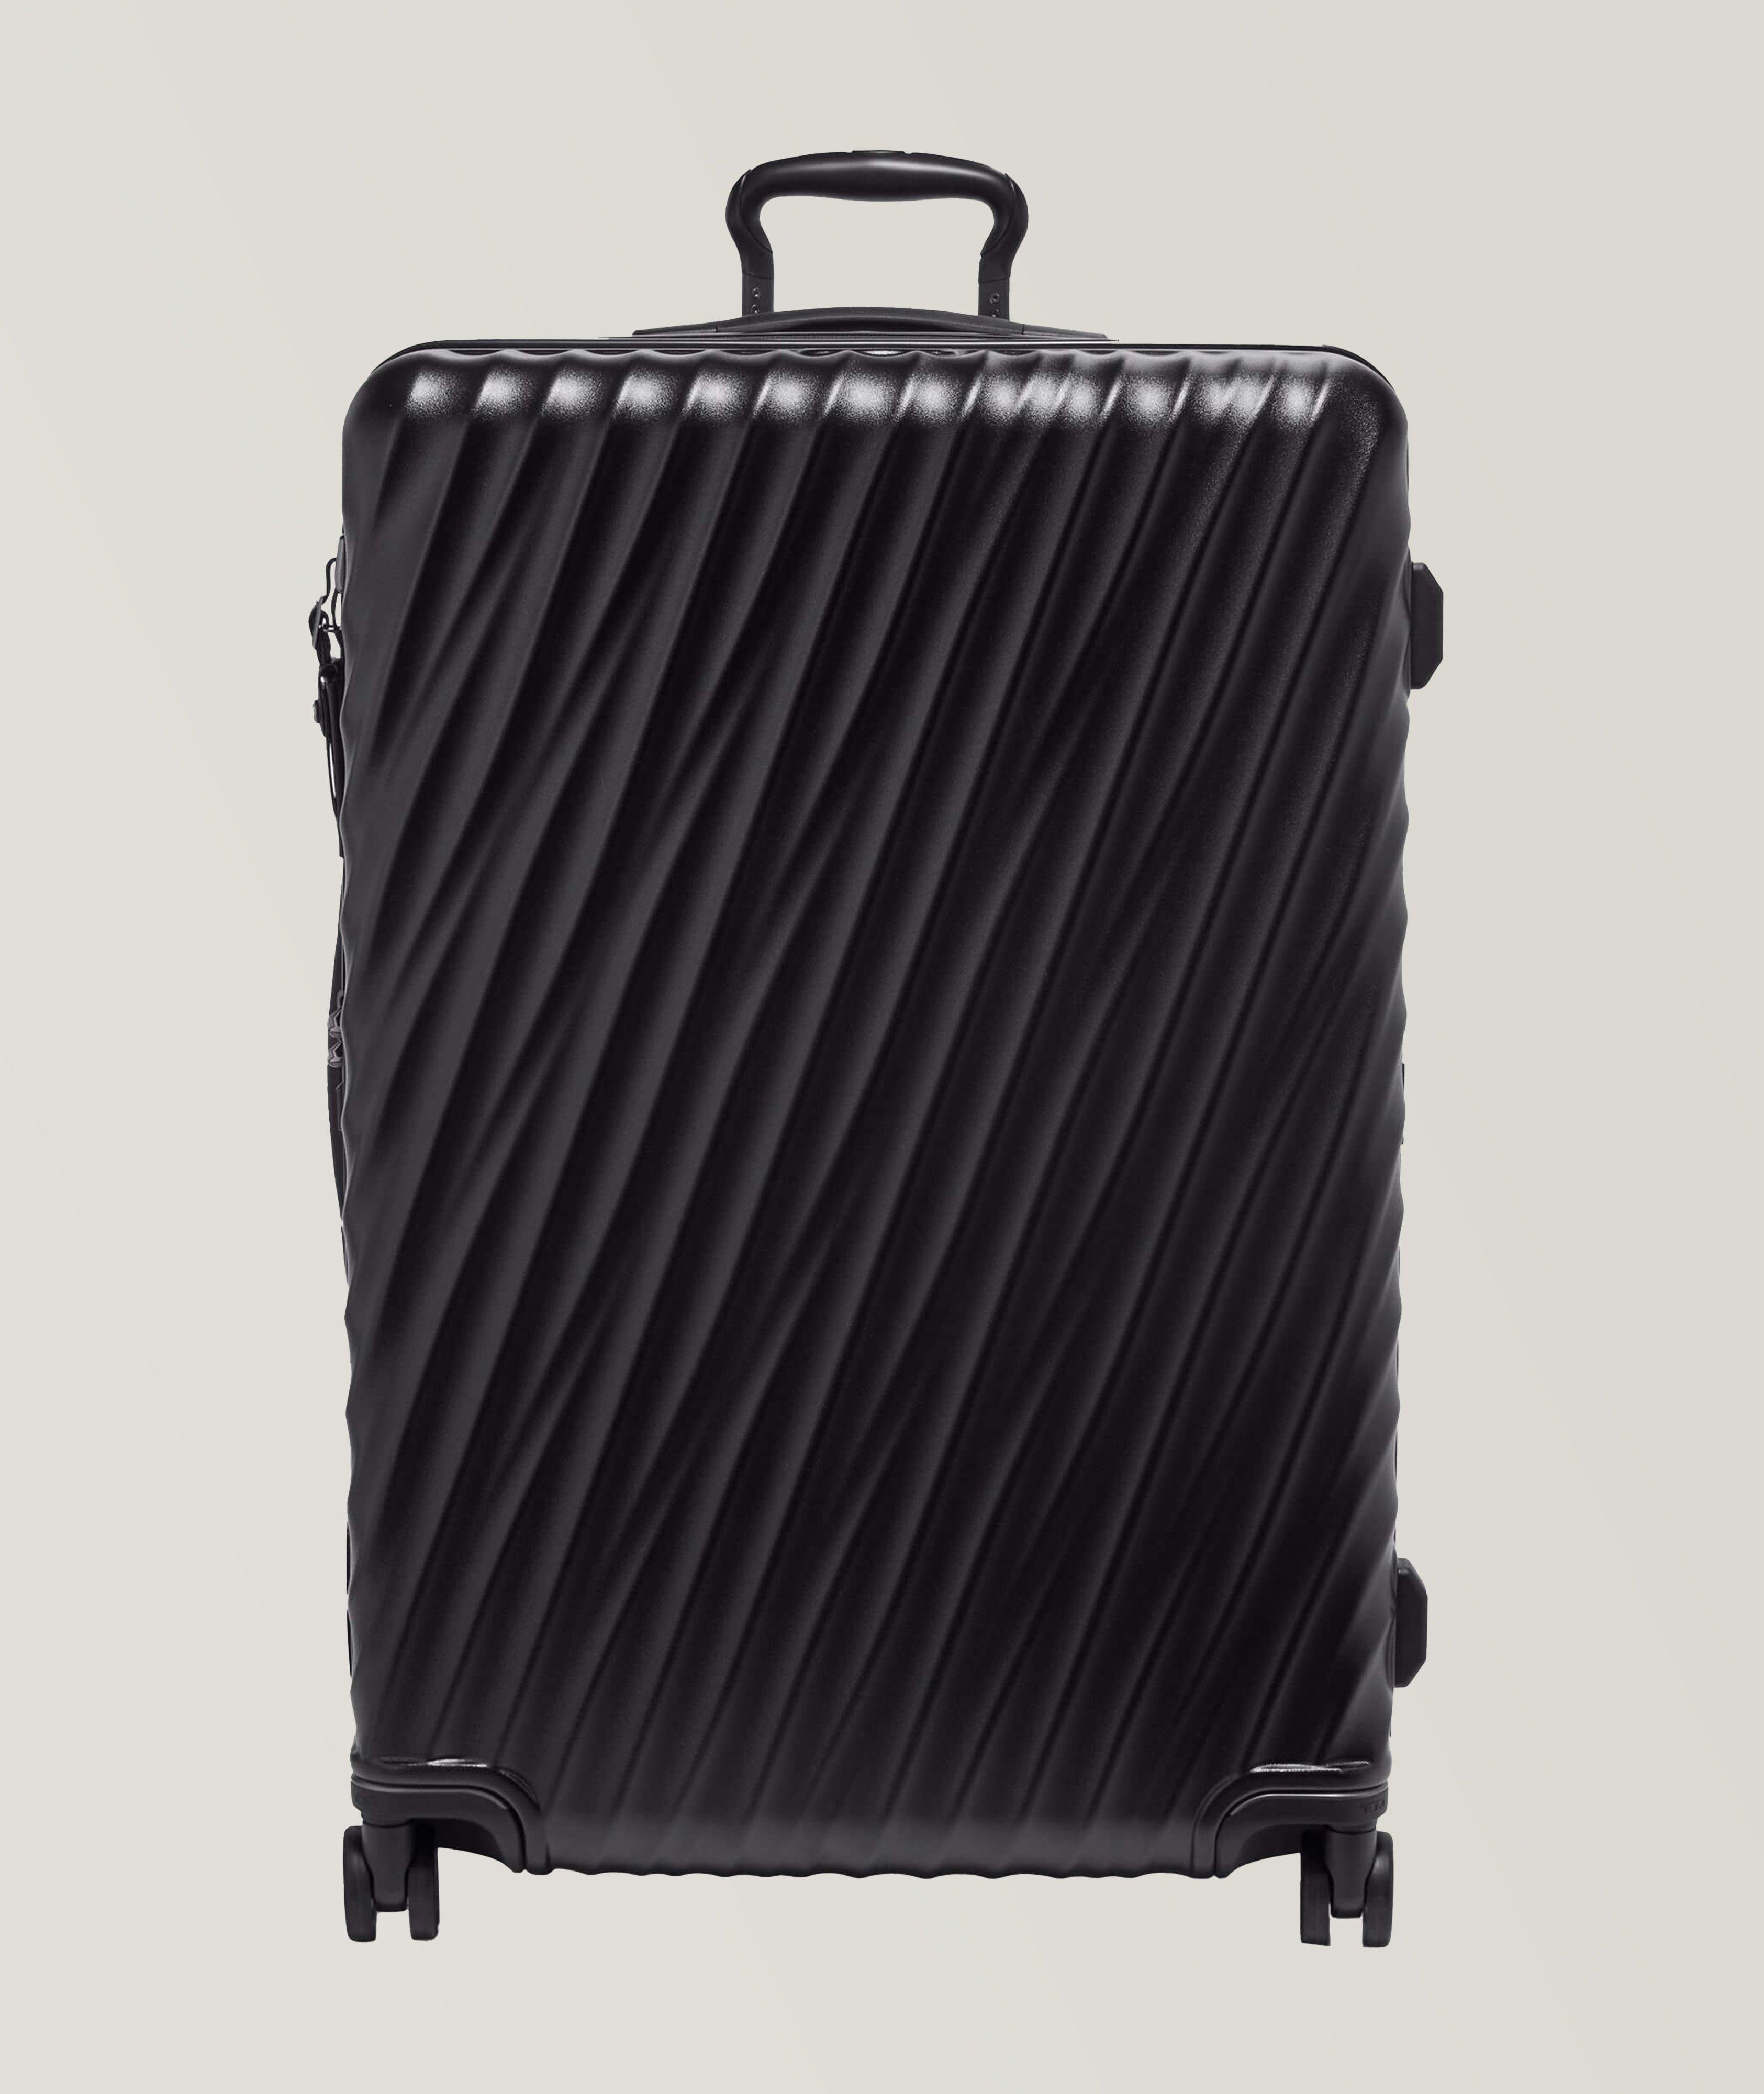 19 Degree Extended Trip Expandable Checked Luggage 